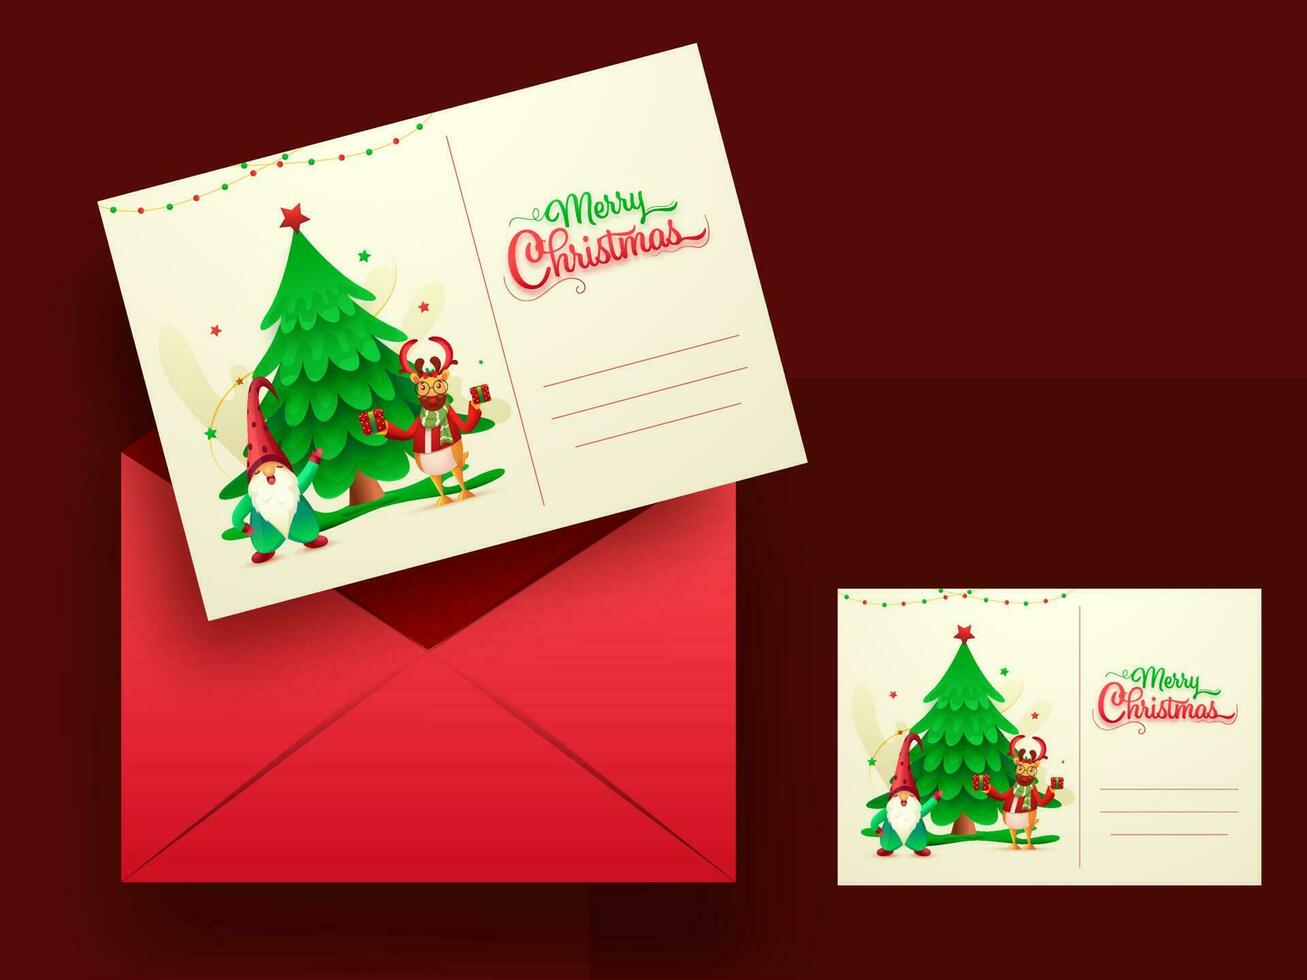 Merry Christmas Greeting Cards Or Invitation With Red Envelope Illustration. vector